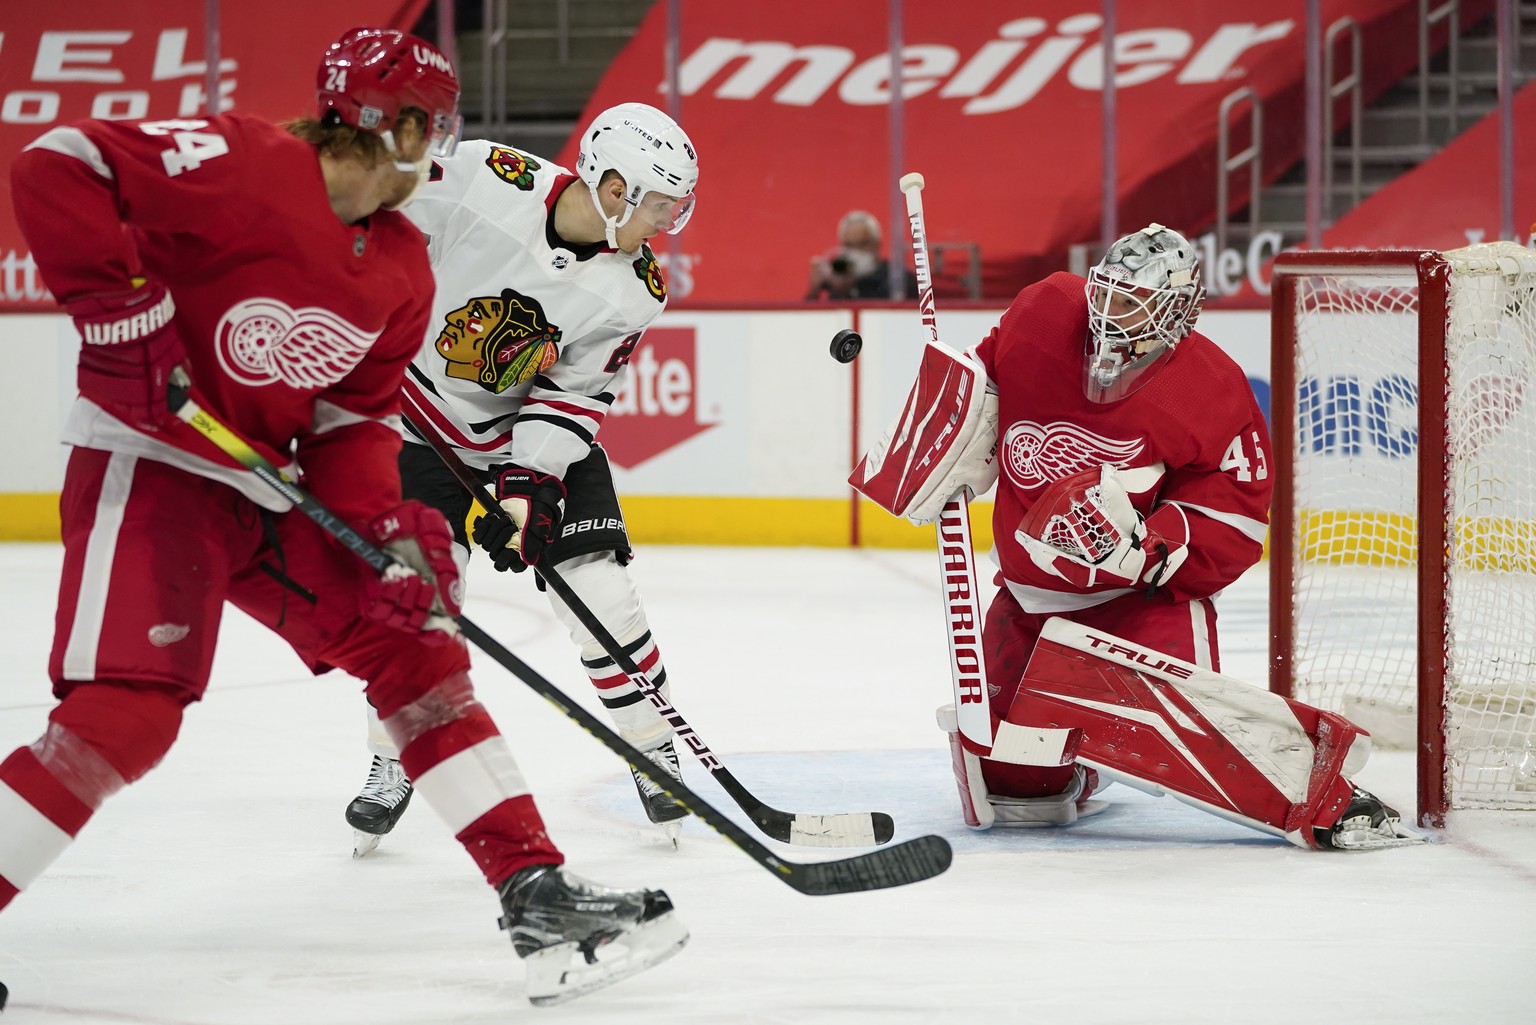 Detroit Red Wings goaltender Jonathan Bernier (45) stops a shot by Chicago Blackhawks center Pius Suter (24) in the third period of an NHL hockey game Wednesday, Feb. 17, 2021, in Detroit. (AP Photo/P ...